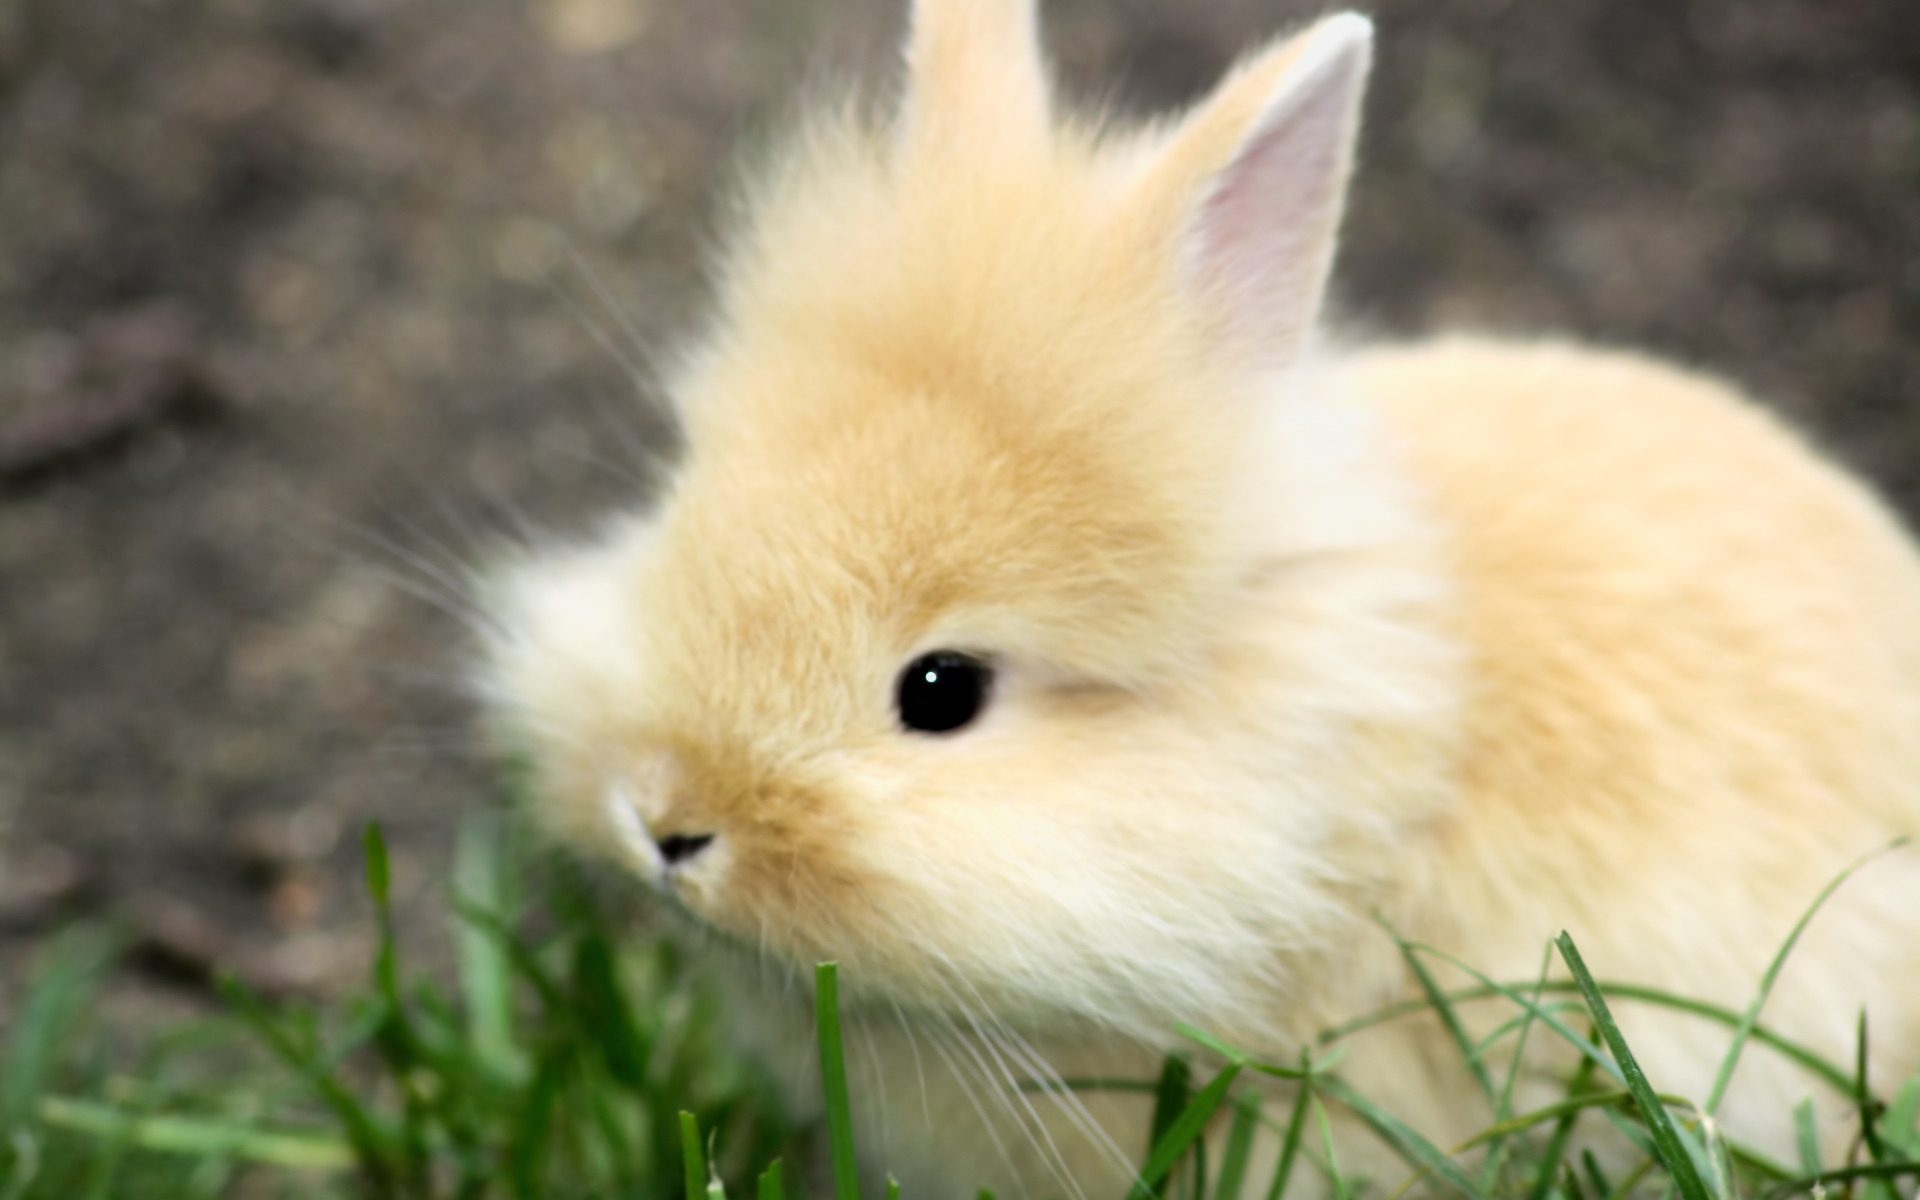 THE CUTEST BABY BUNNIES Images amp Pictures   Becuo